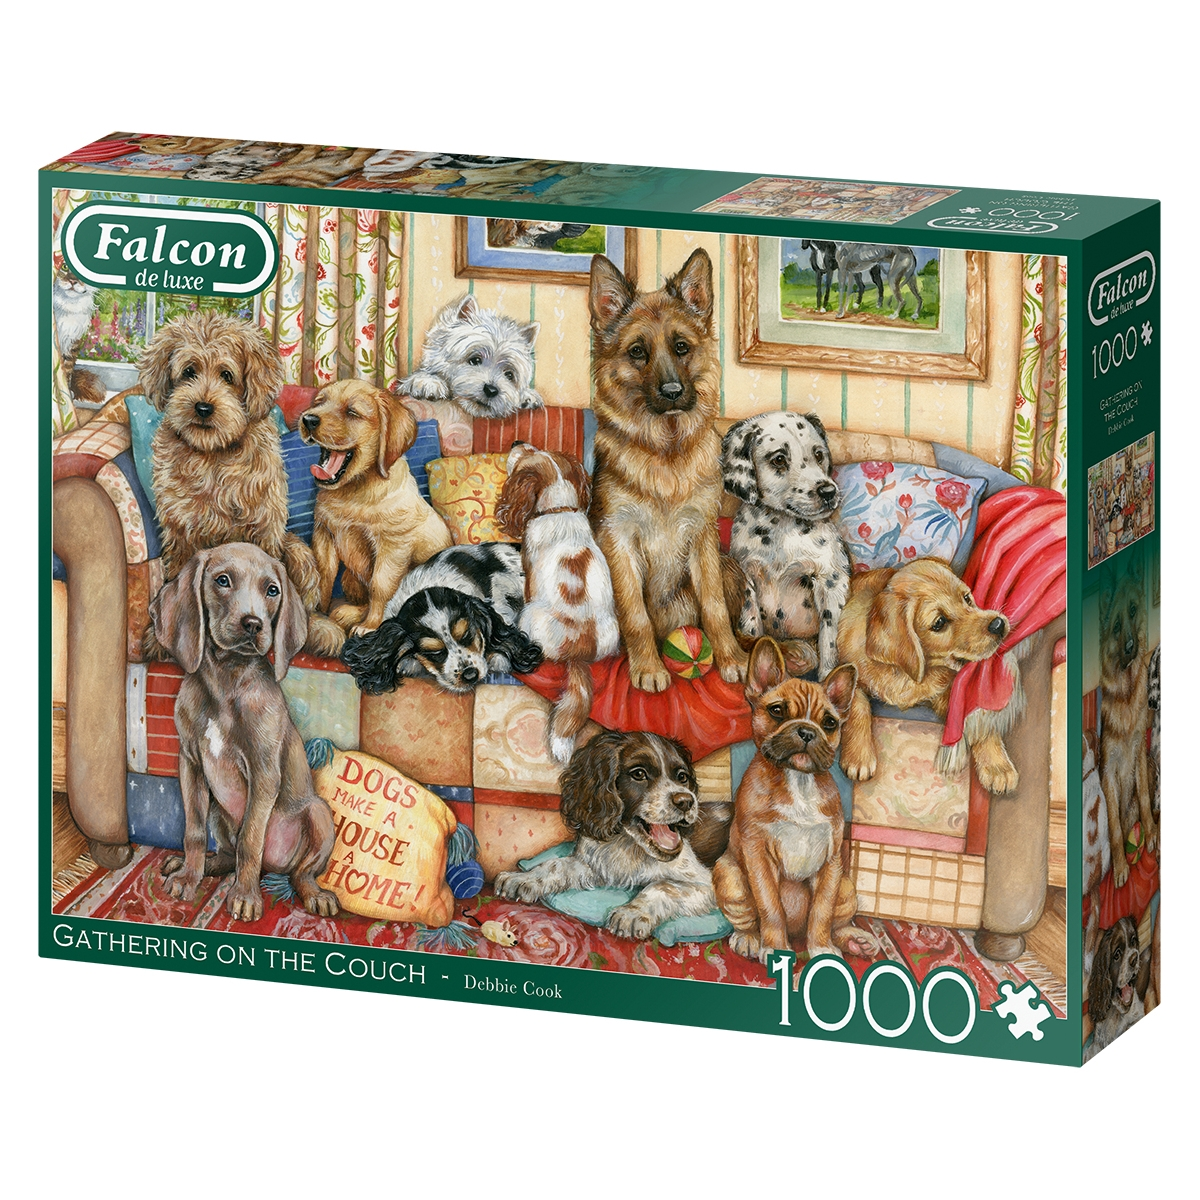 FALCON Jumbo Teile Mehrfarben Couch-1000 11293 Zubehör, Dog The Gathering Puzzle on